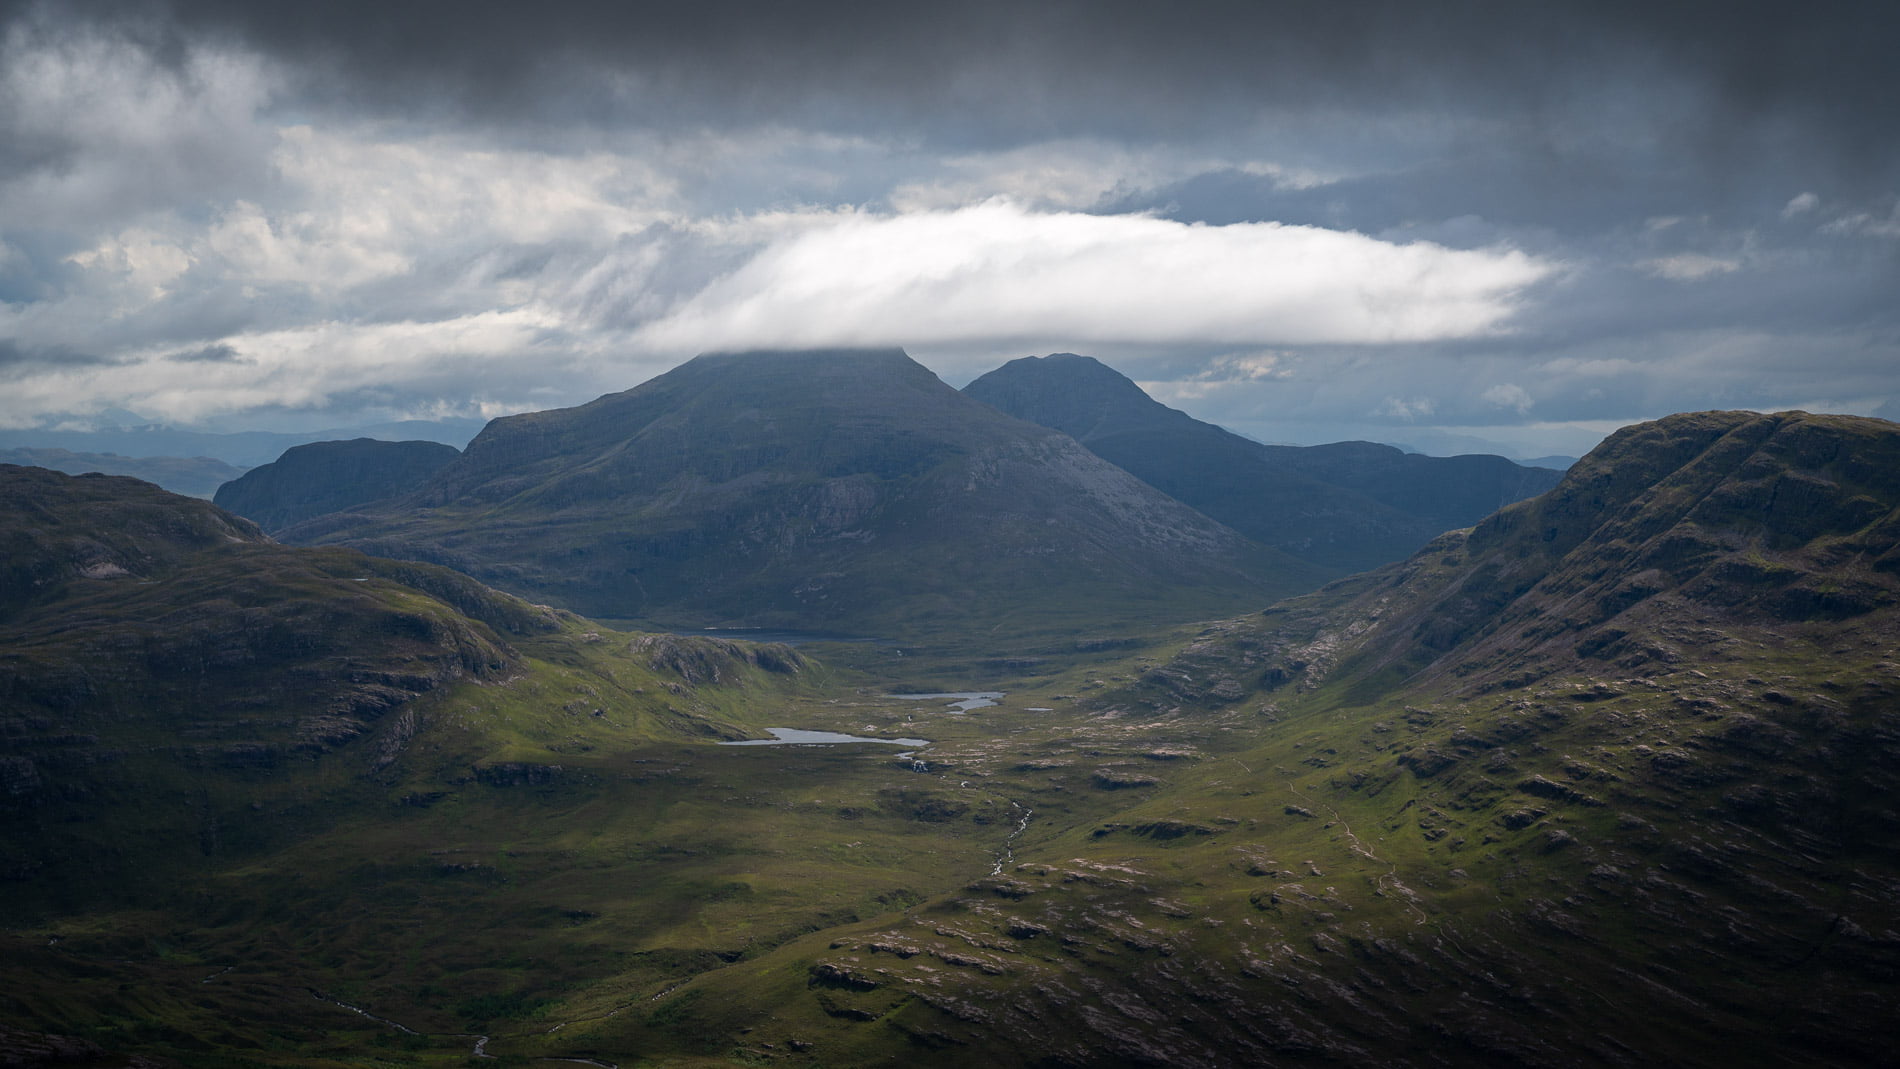 From Liathach